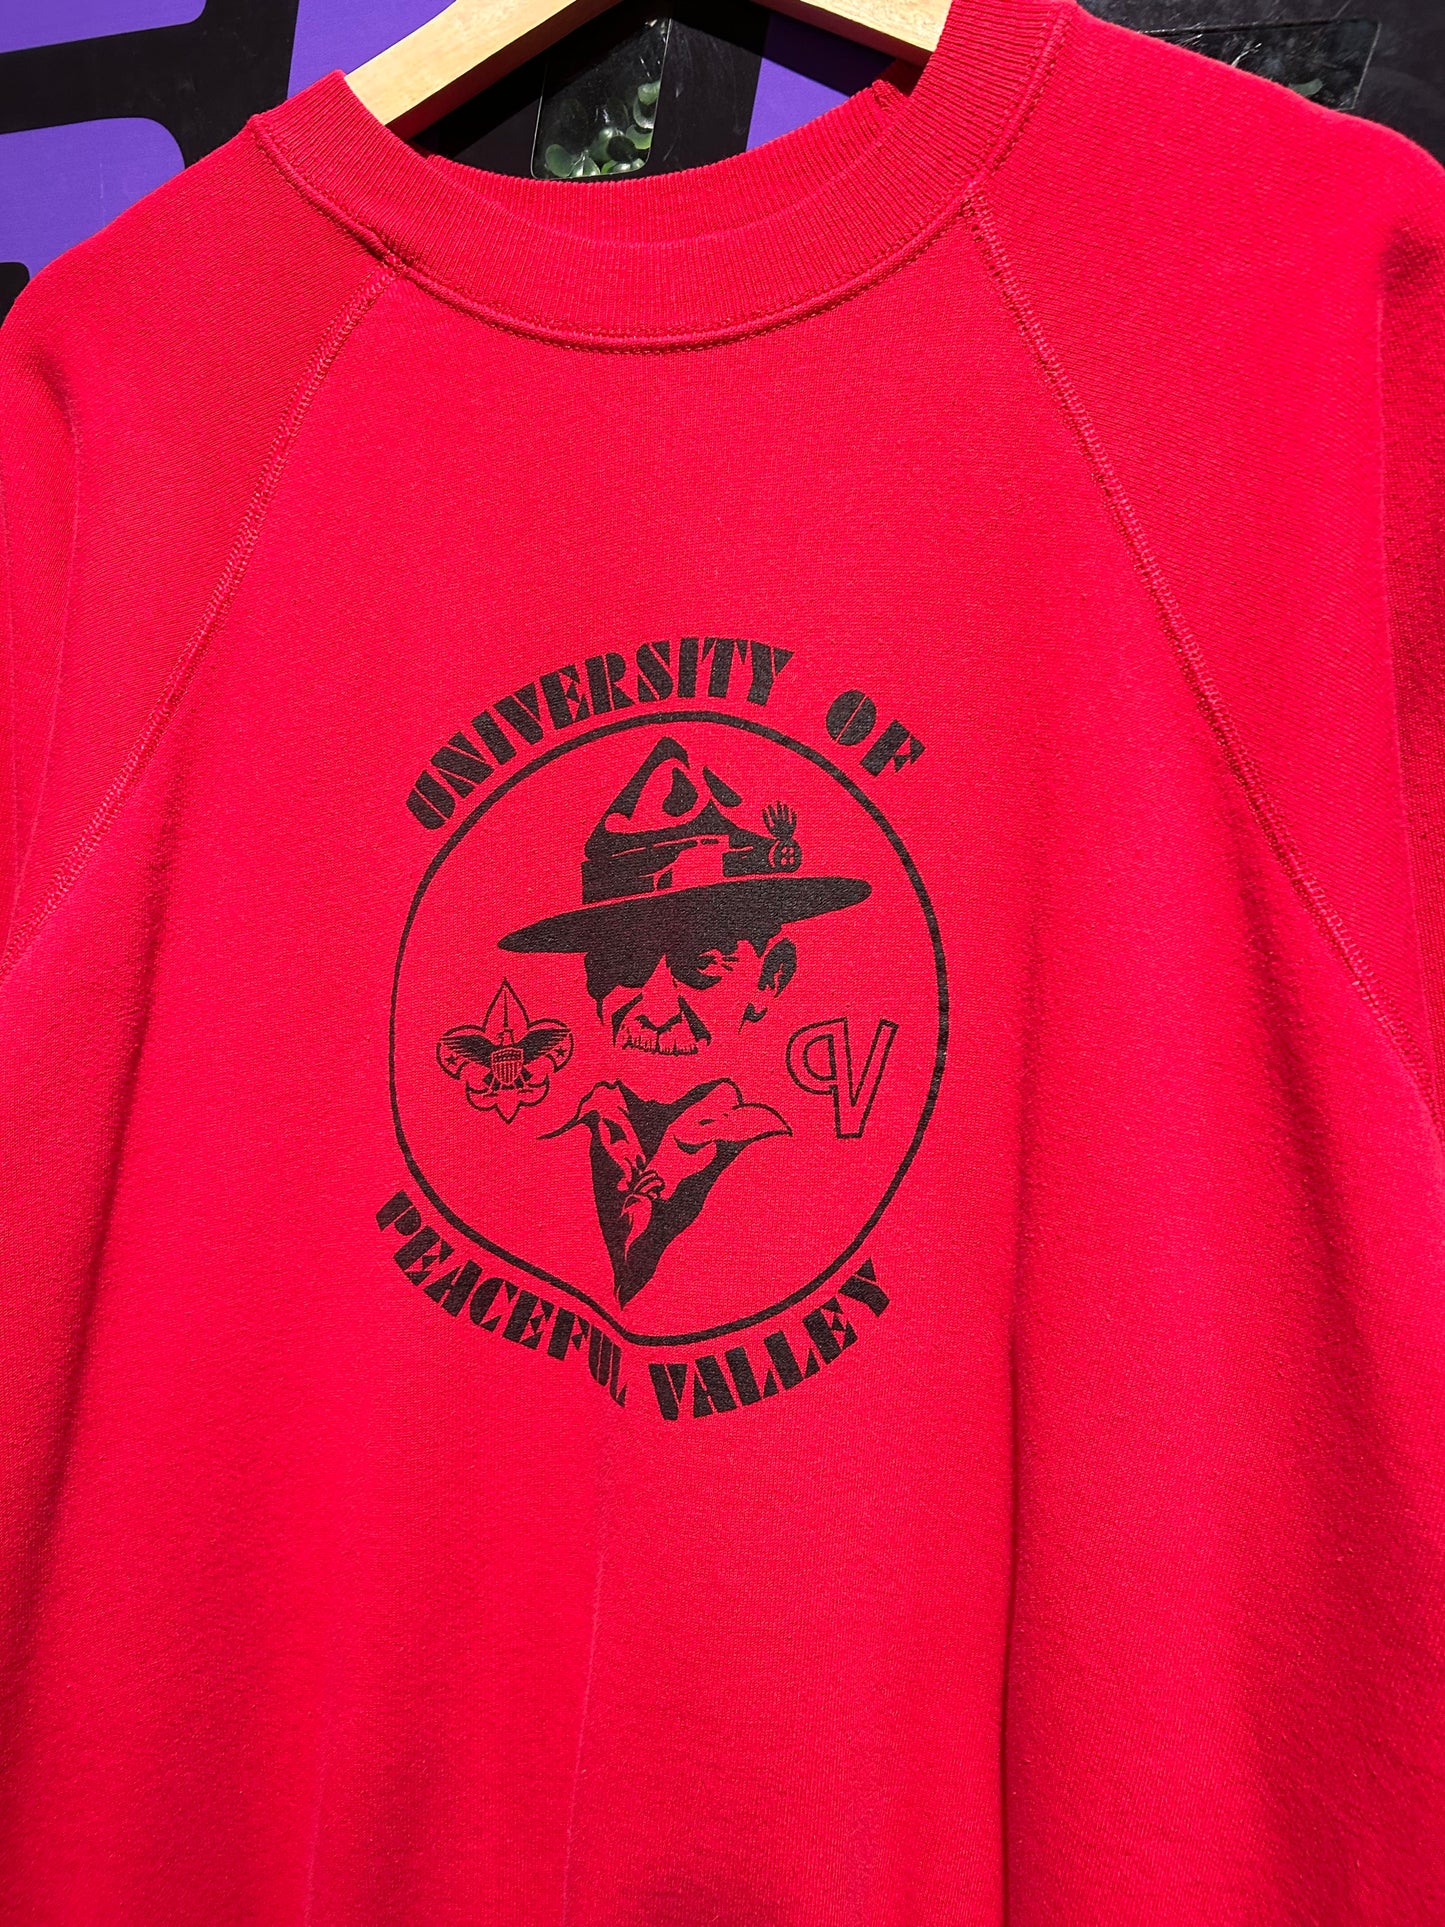 90s University of Peaceful Valley Crewneck. Size Large